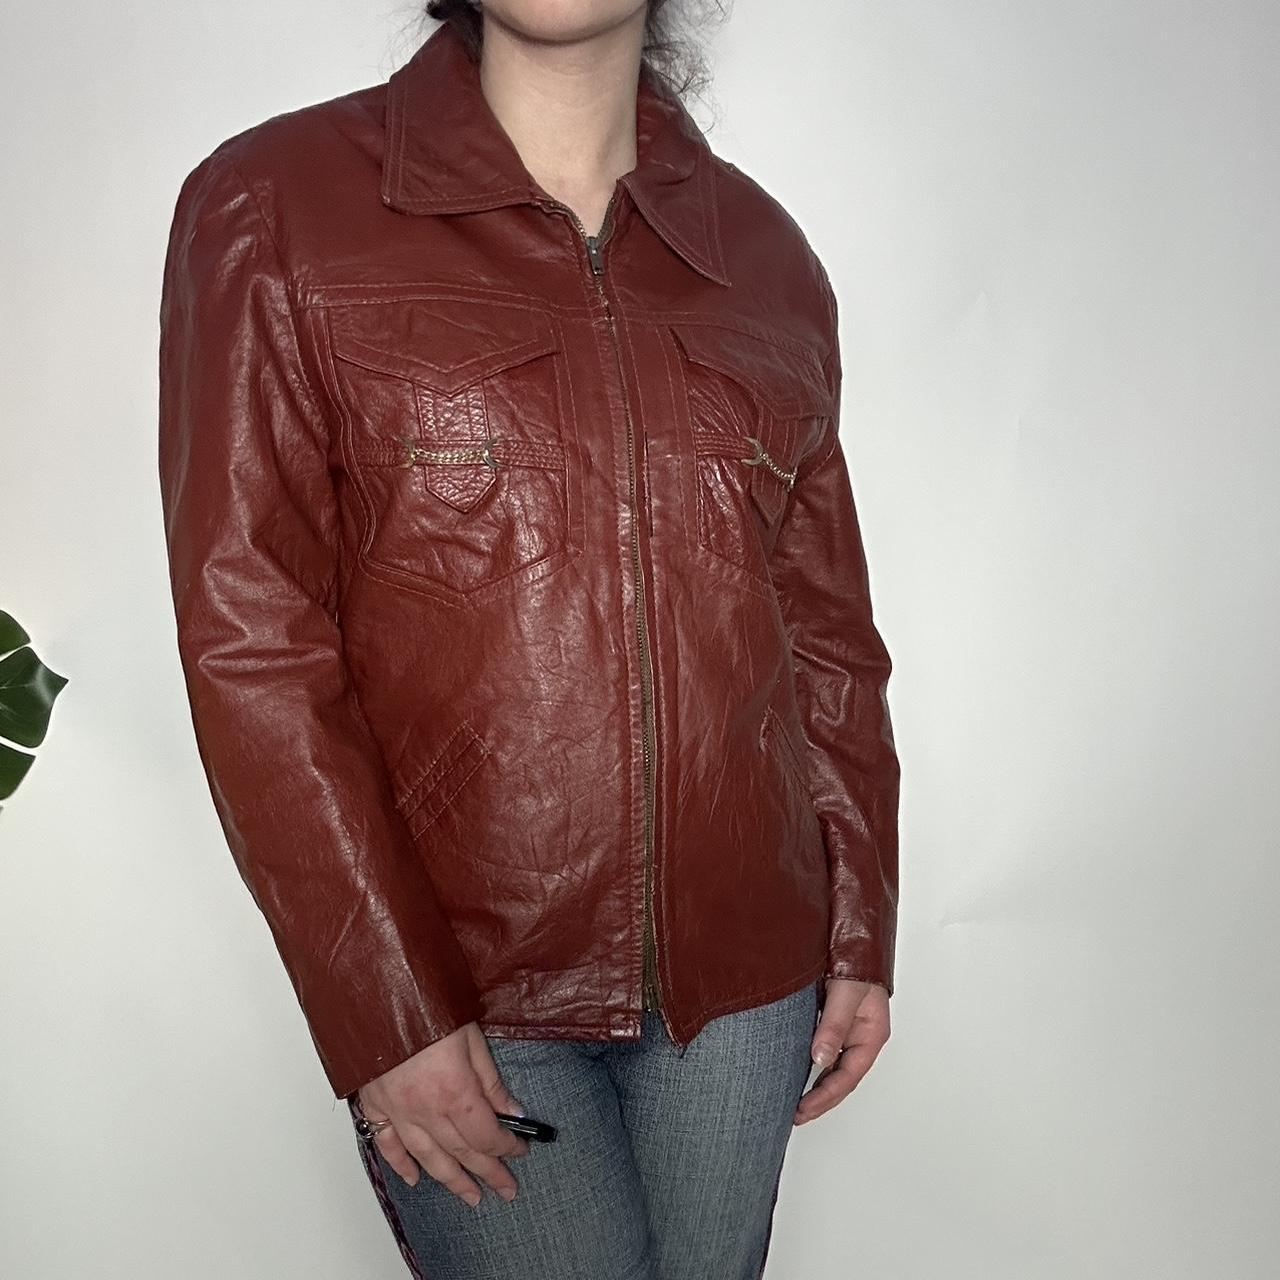 Vintage 70s red real leather jacket